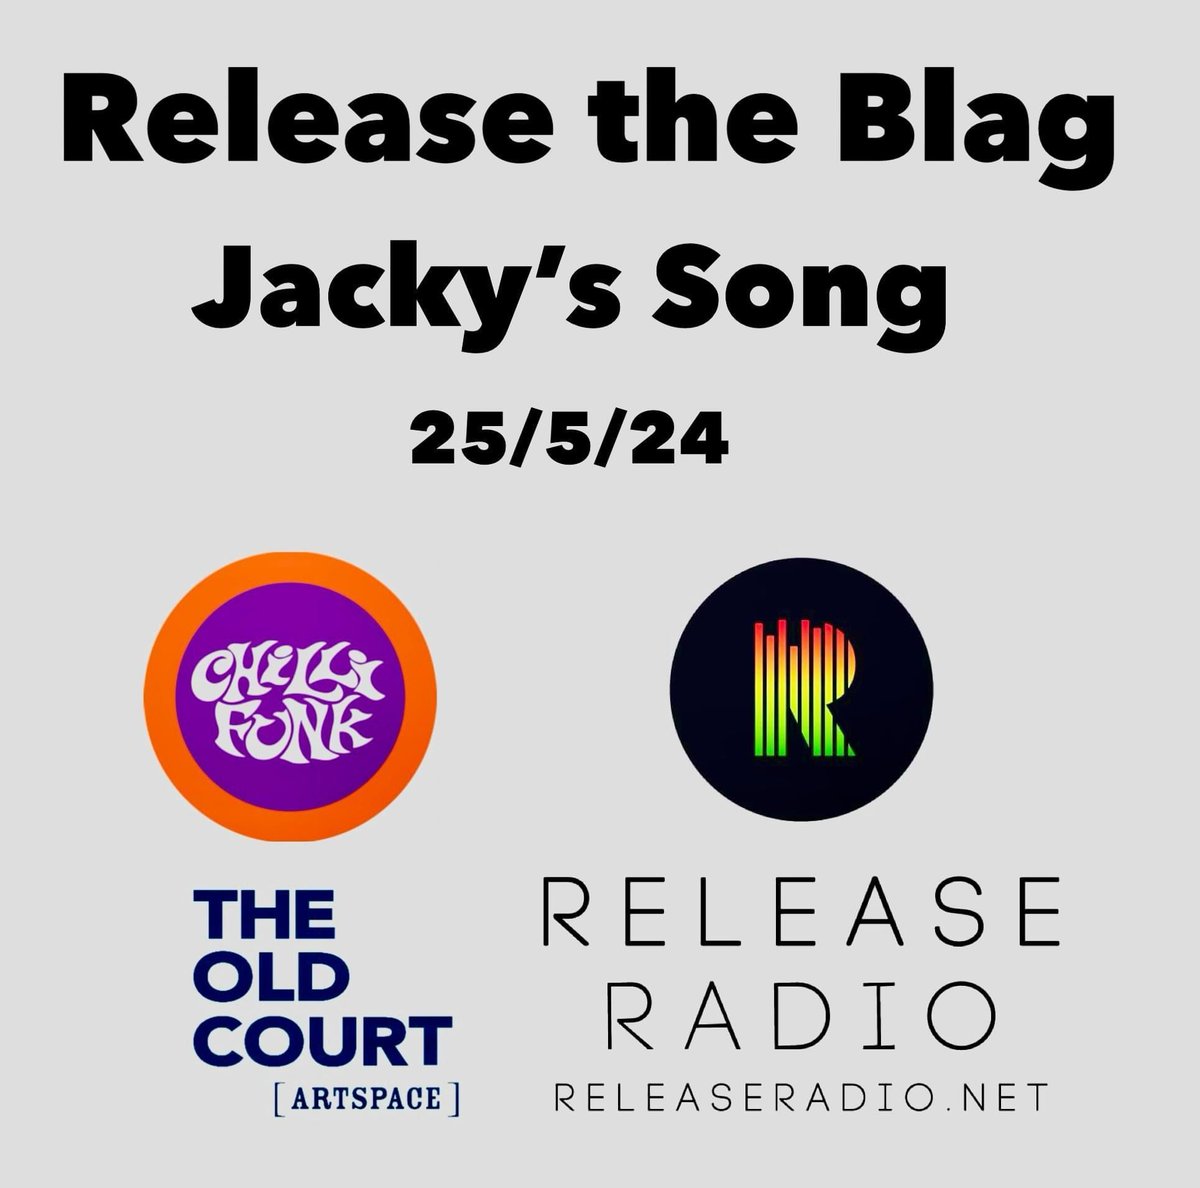 This weekend at The Old Court Release The Blag return with a special charity event Jacky's Song for two amazing charities, @ThamesHospice and Daisys_Dream.

Tickets: £15 in advance on Skiddle.

#charityevent #fundraising #fundraisingevent #fundraisingforacause #thamehospice